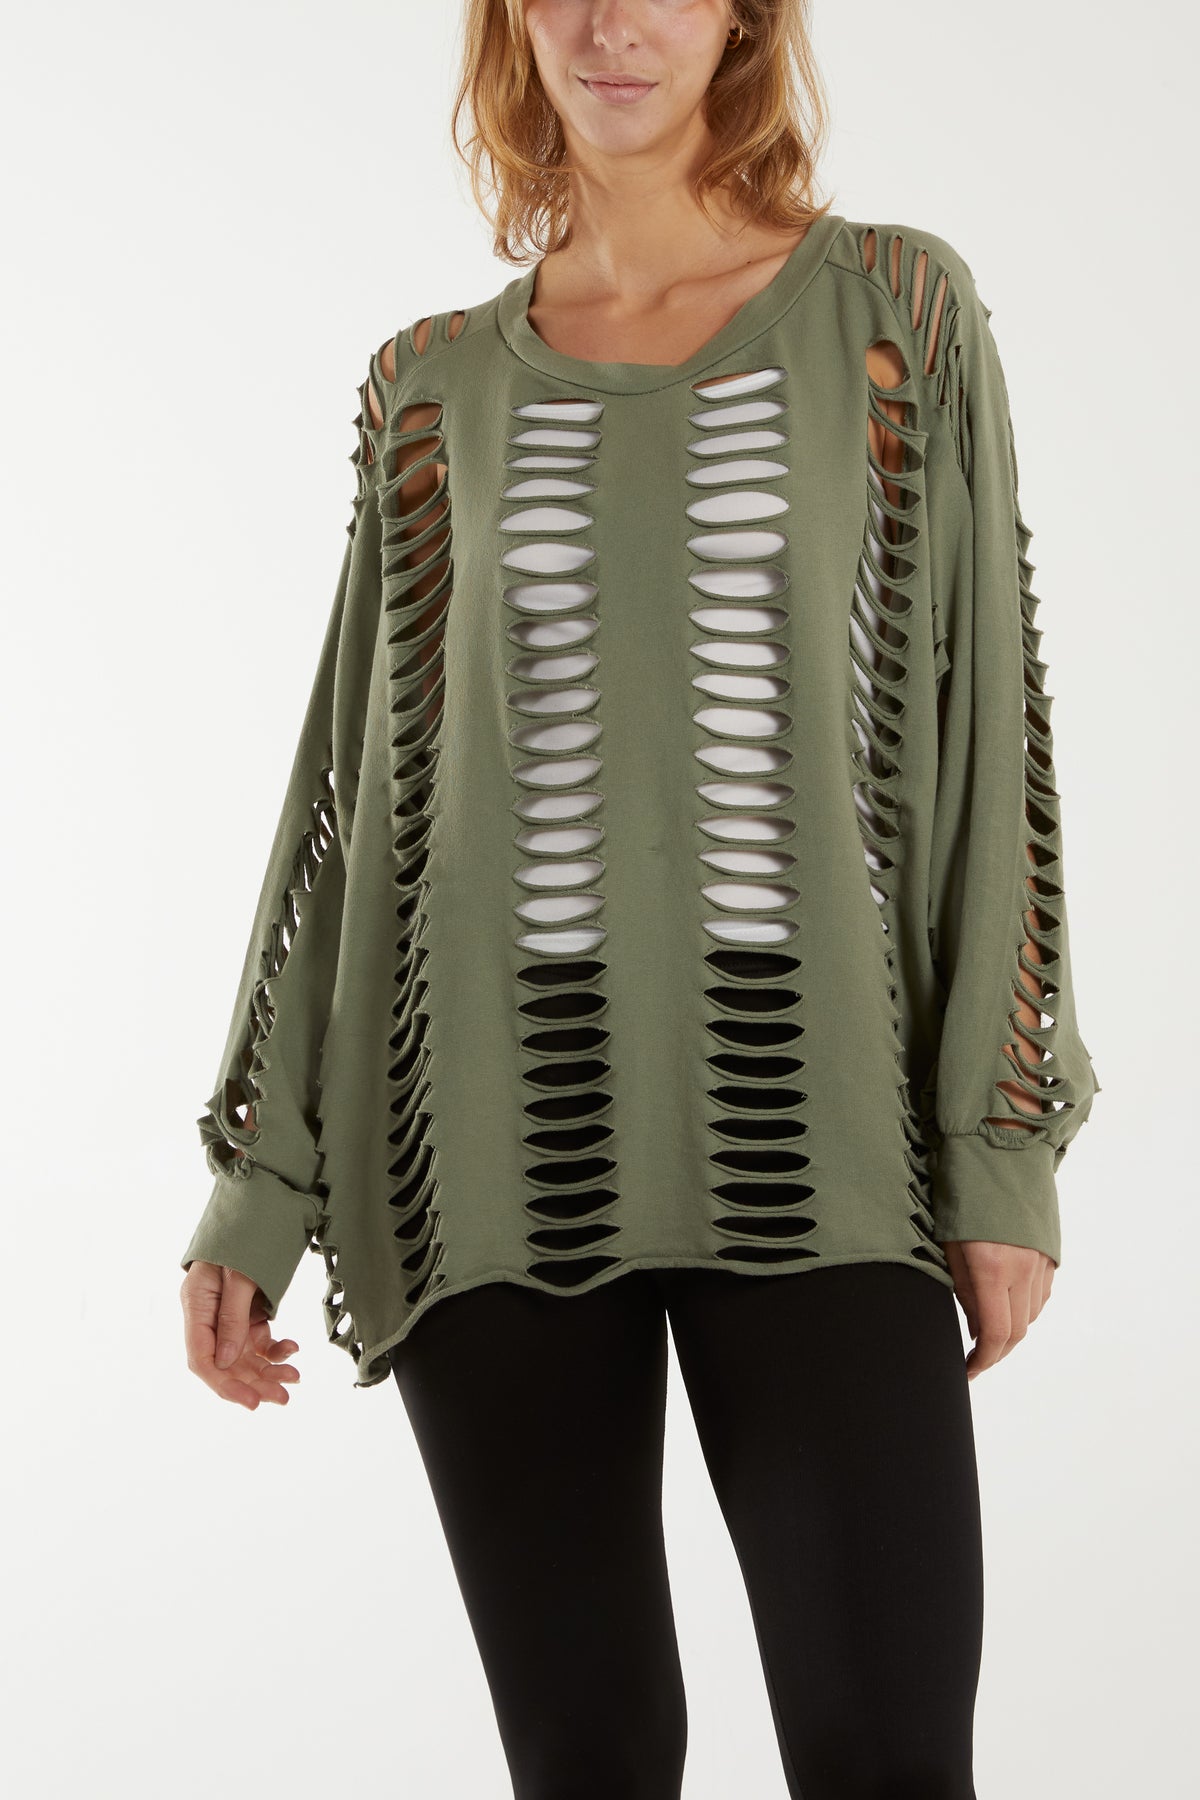 Distressed Cut Out Batwing Long Sleeve Top